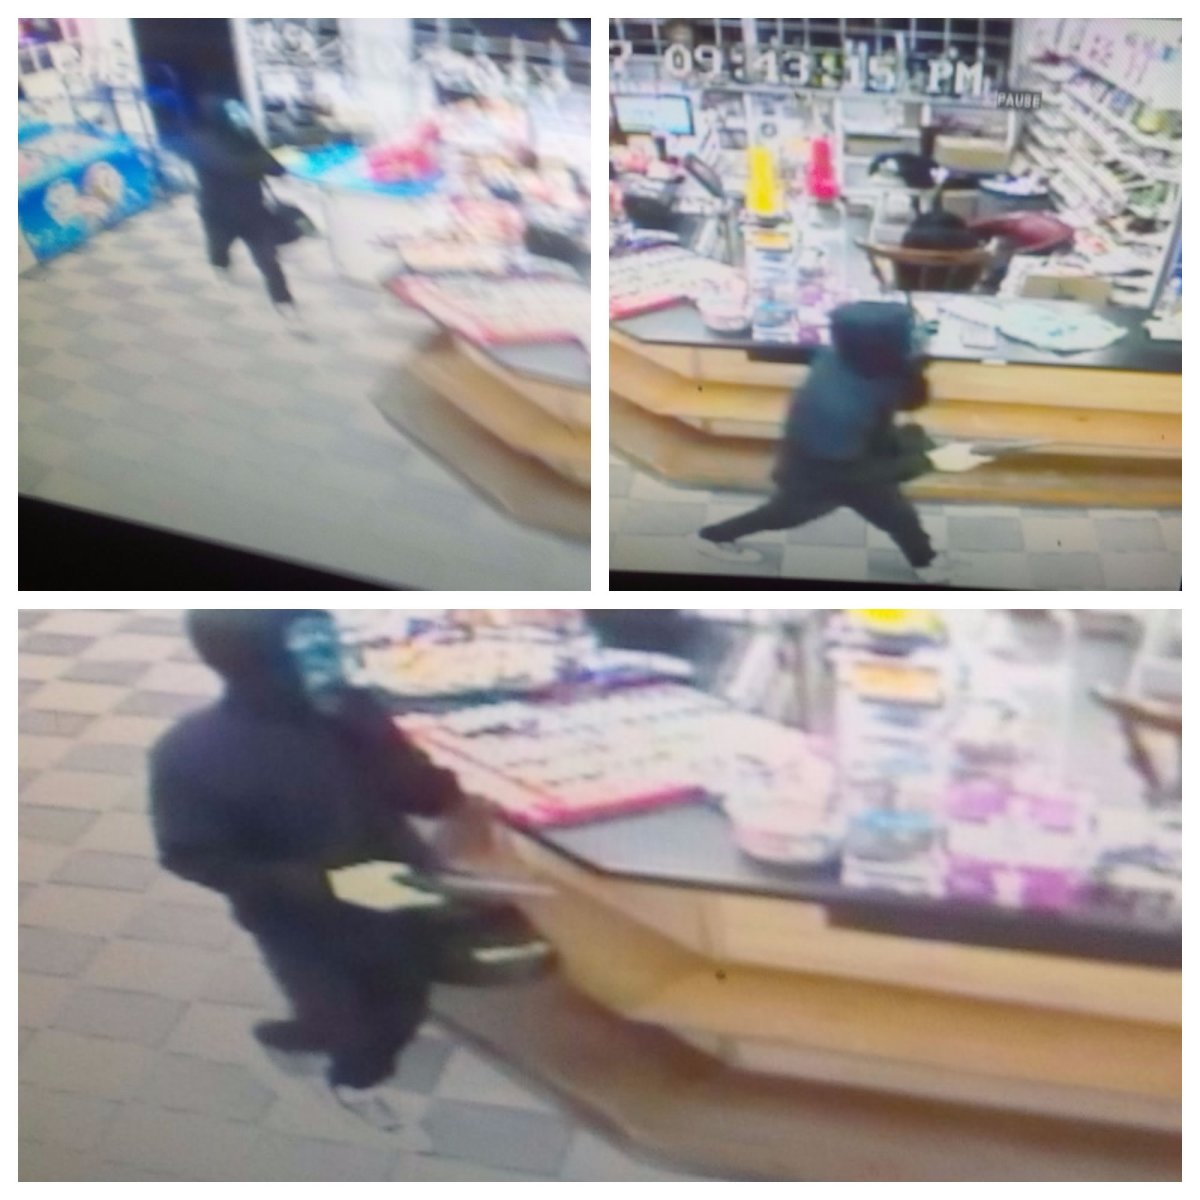 Halifax Regional Police released these images of the suspect wanted in relation to three attempted robberies in Dartmouth and Bedford on Thursday evening.